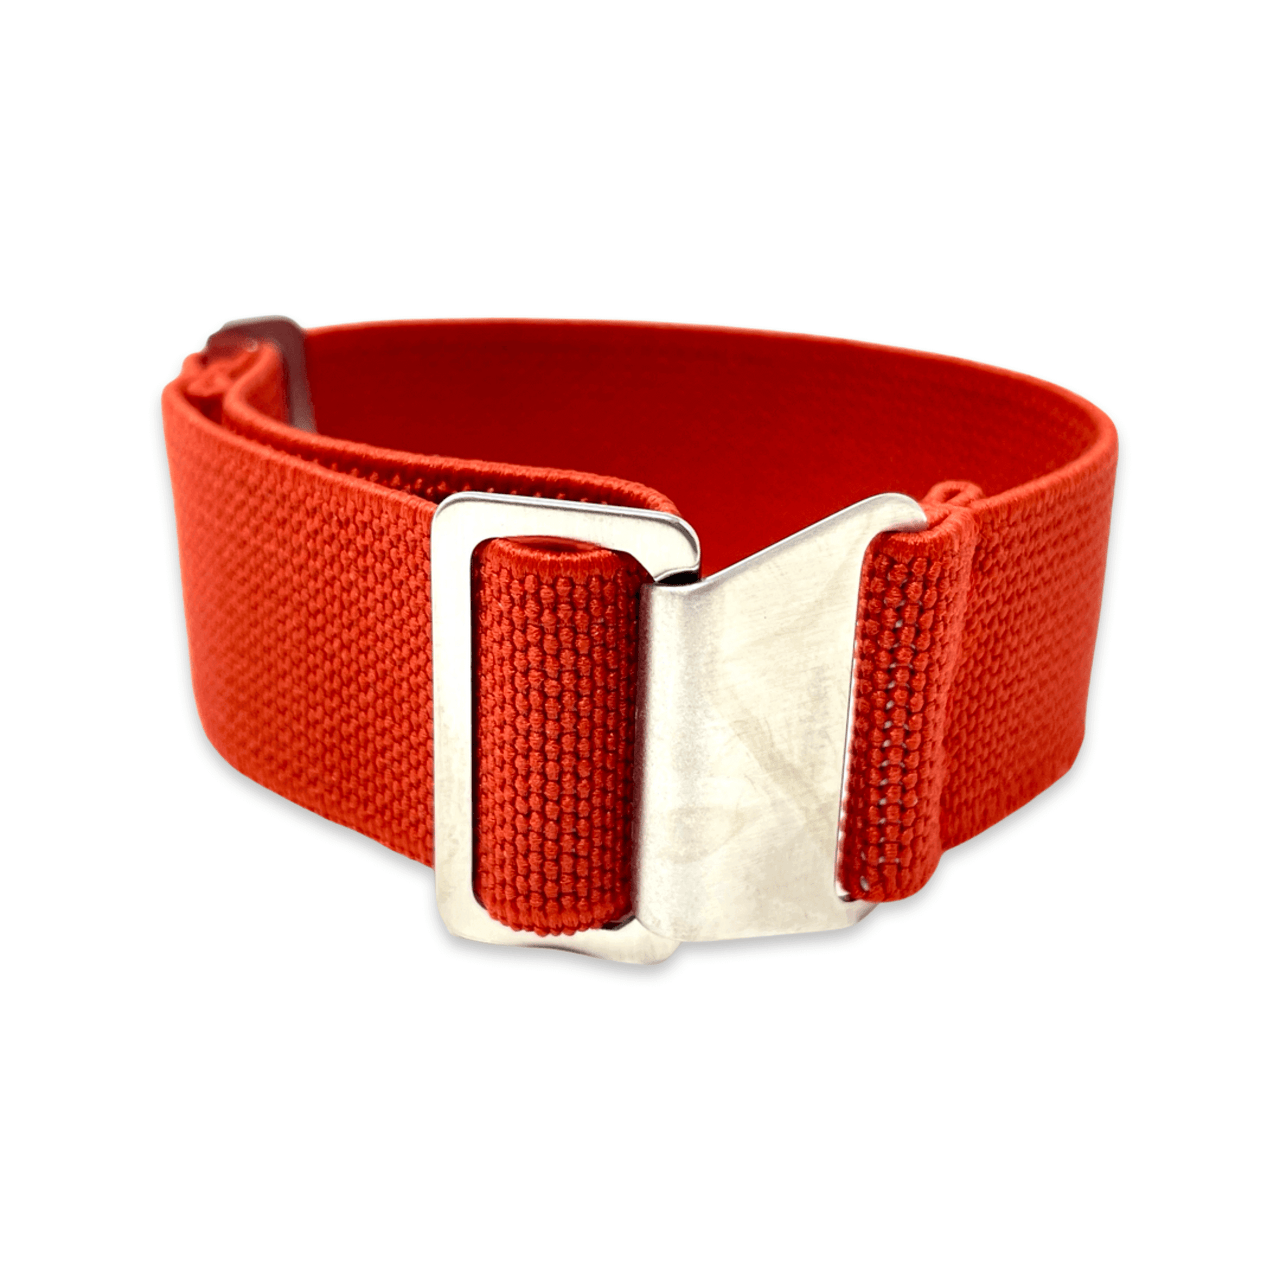 Marine Nationale Military Style Elastic Strap - Red